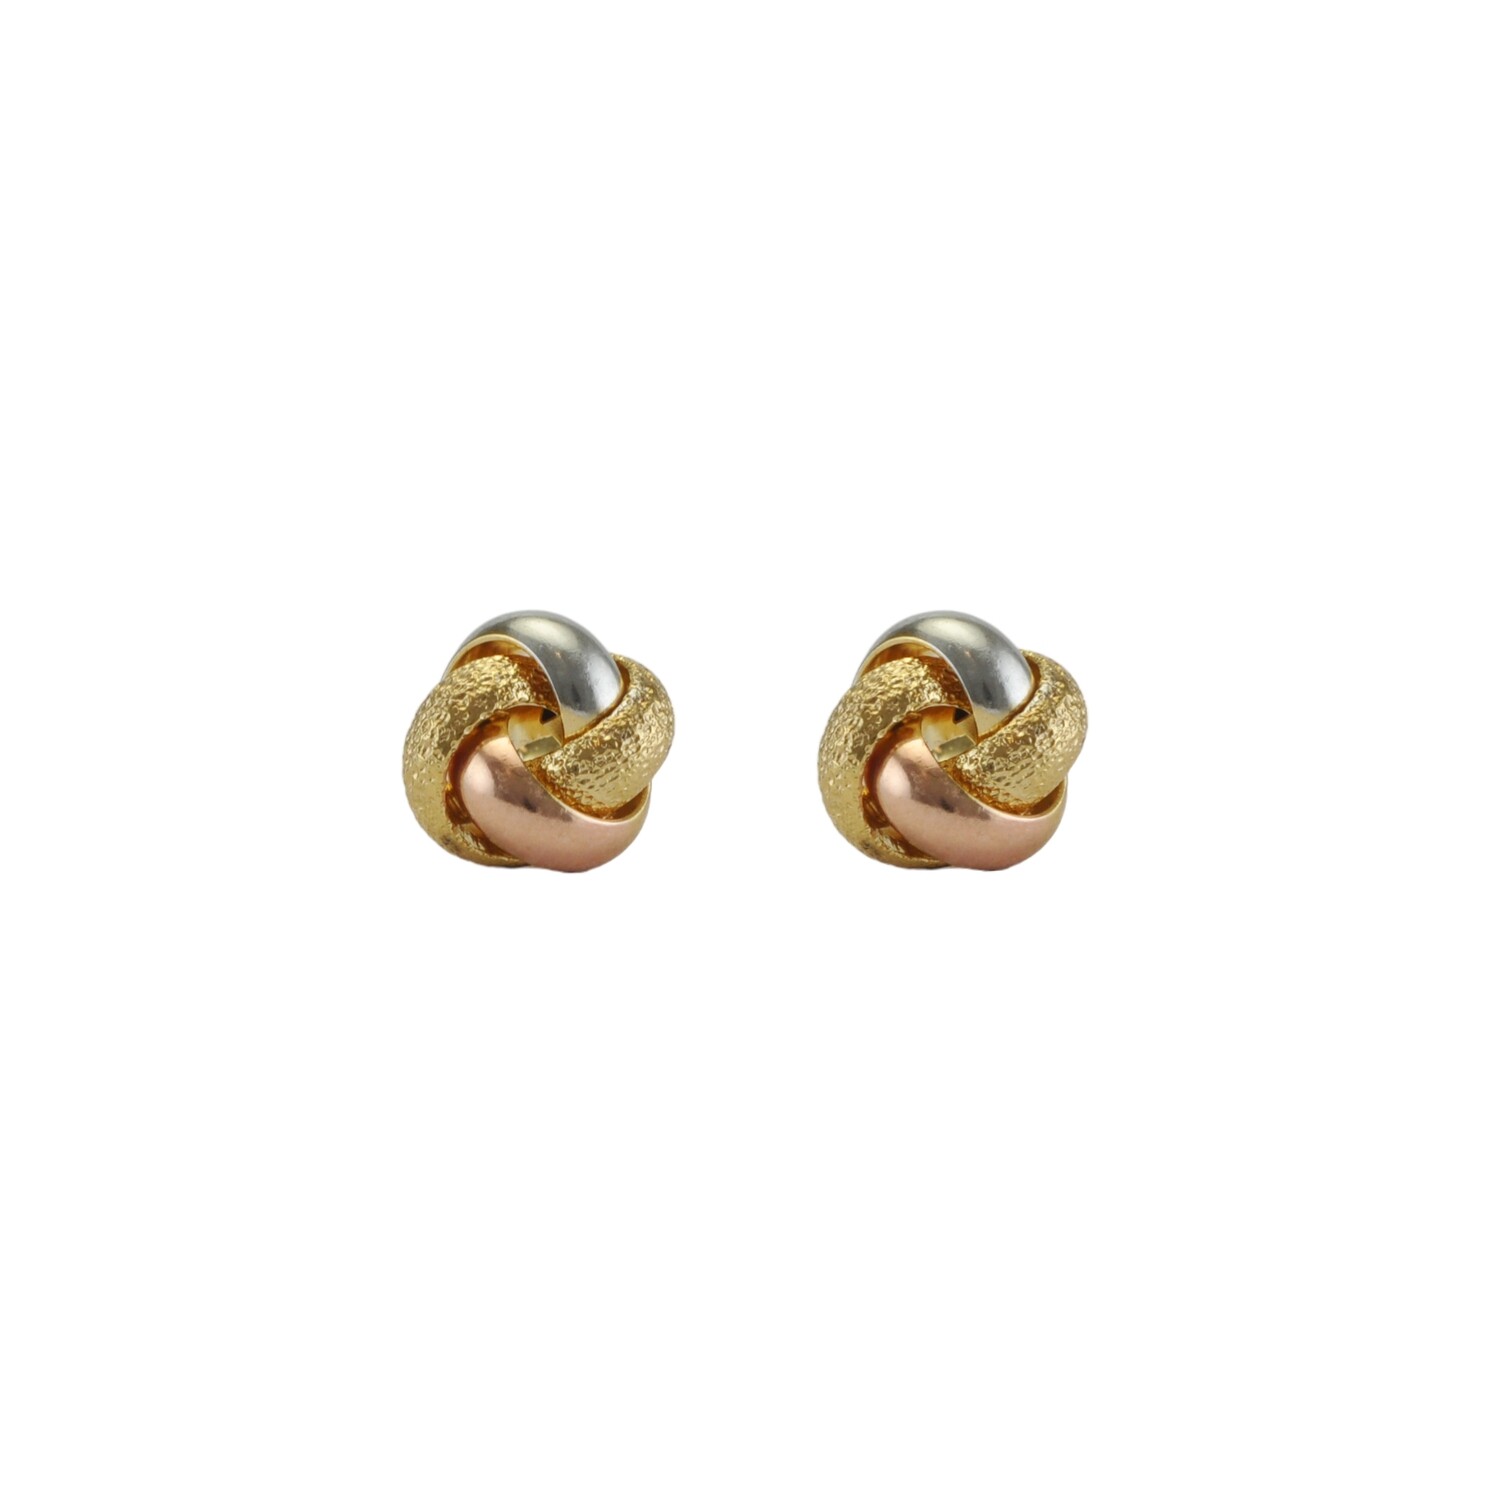 Three Colour Gold Knot Earrings